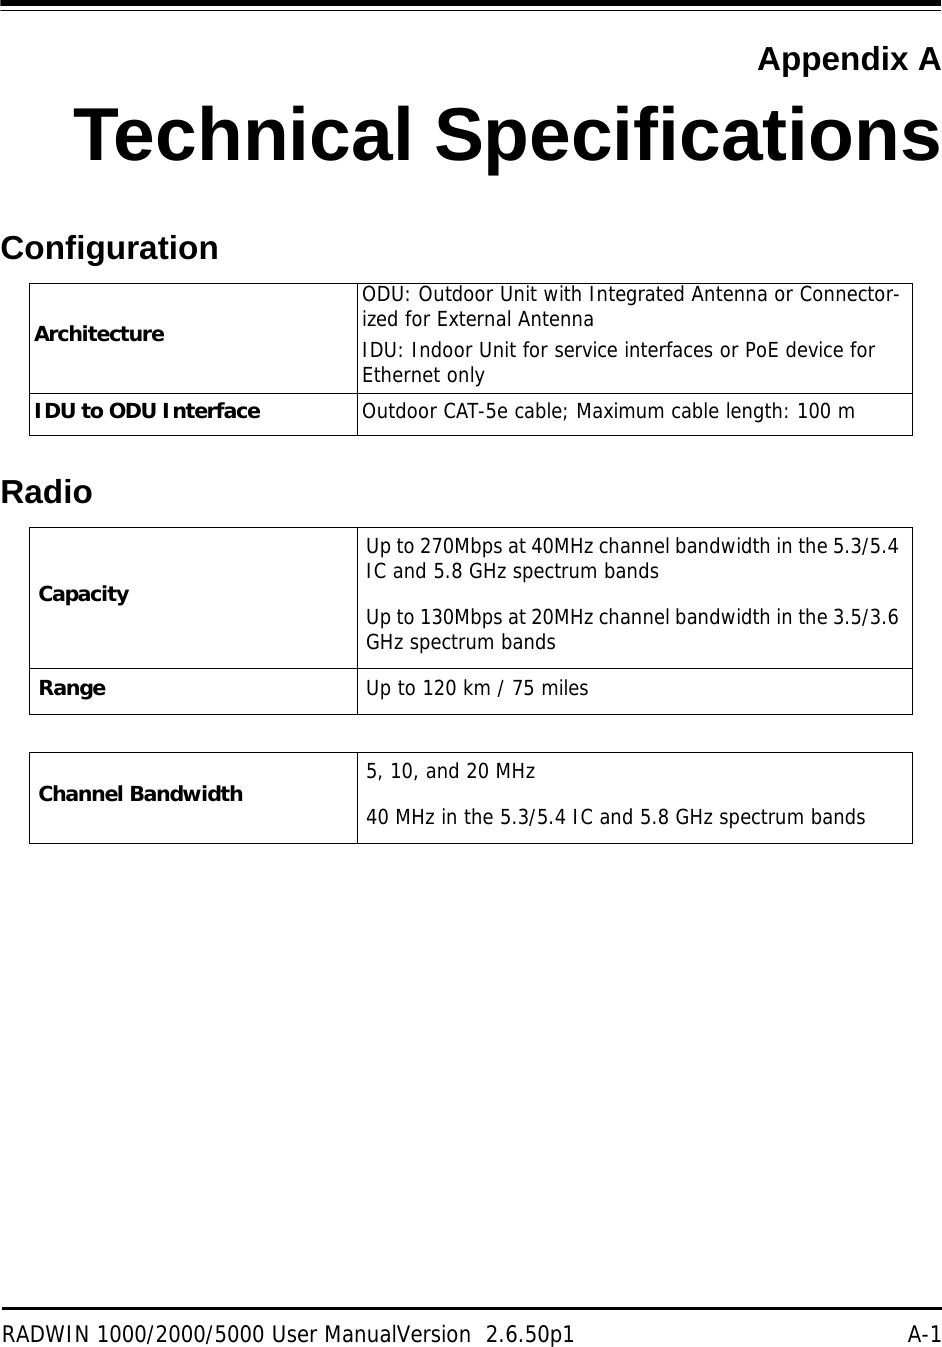 RADWIN 1000/2000/5000 User ManualVersion  2.6.50p1 A-1Appendix ATechnical SpecificationsConfigurationRadioArchitectureODU: Outdoor Unit with Integrated Antenna or Connector-ized for External AntennaIDU: Indoor Unit for service interfaces or PoE device for Ethernet onlyIDU to ODU Interface Outdoor CAT-5e cable; Maximum cable length: 100 mCapacityUp to 270Mbps at 40MHz channel bandwidth in the 5.3/5.4 IC and 5.8 GHz spectrum bandsUp to 130Mbps at 20MHz channel bandwidth in the 3.5/3.6 GHz spectrum bandsRange Up to 120 km / 75 milesChannel Bandwidth 5, 10, and 20 MHz40 MHz in the 5.3/5.4 IC and 5.8 GHz spectrum bands